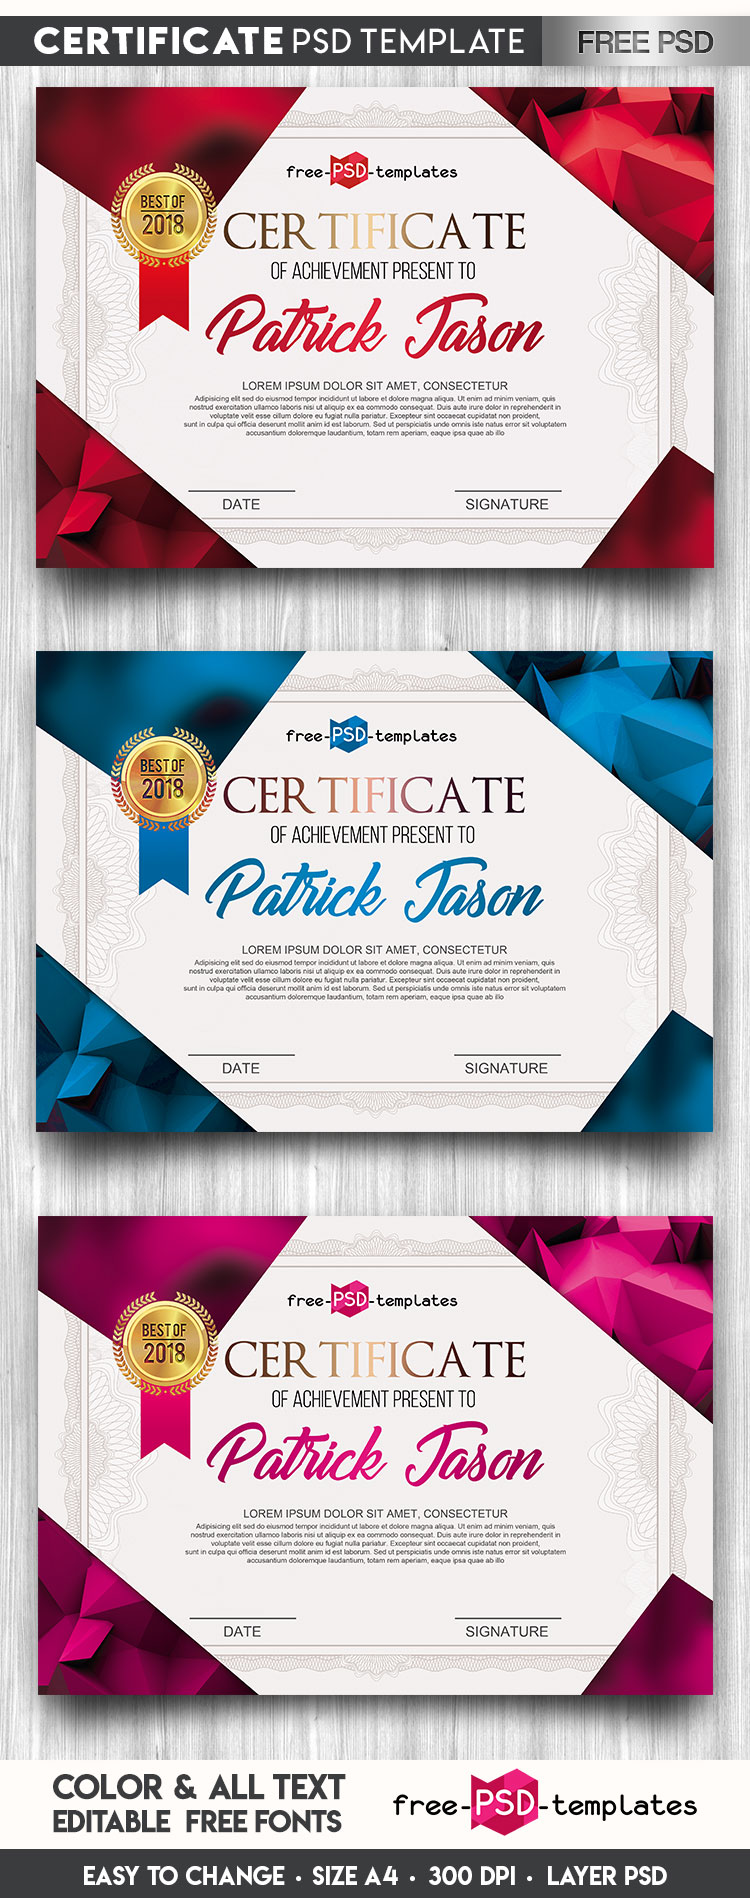 Free Certificate Template IN PSD | Free-PSD-Templates